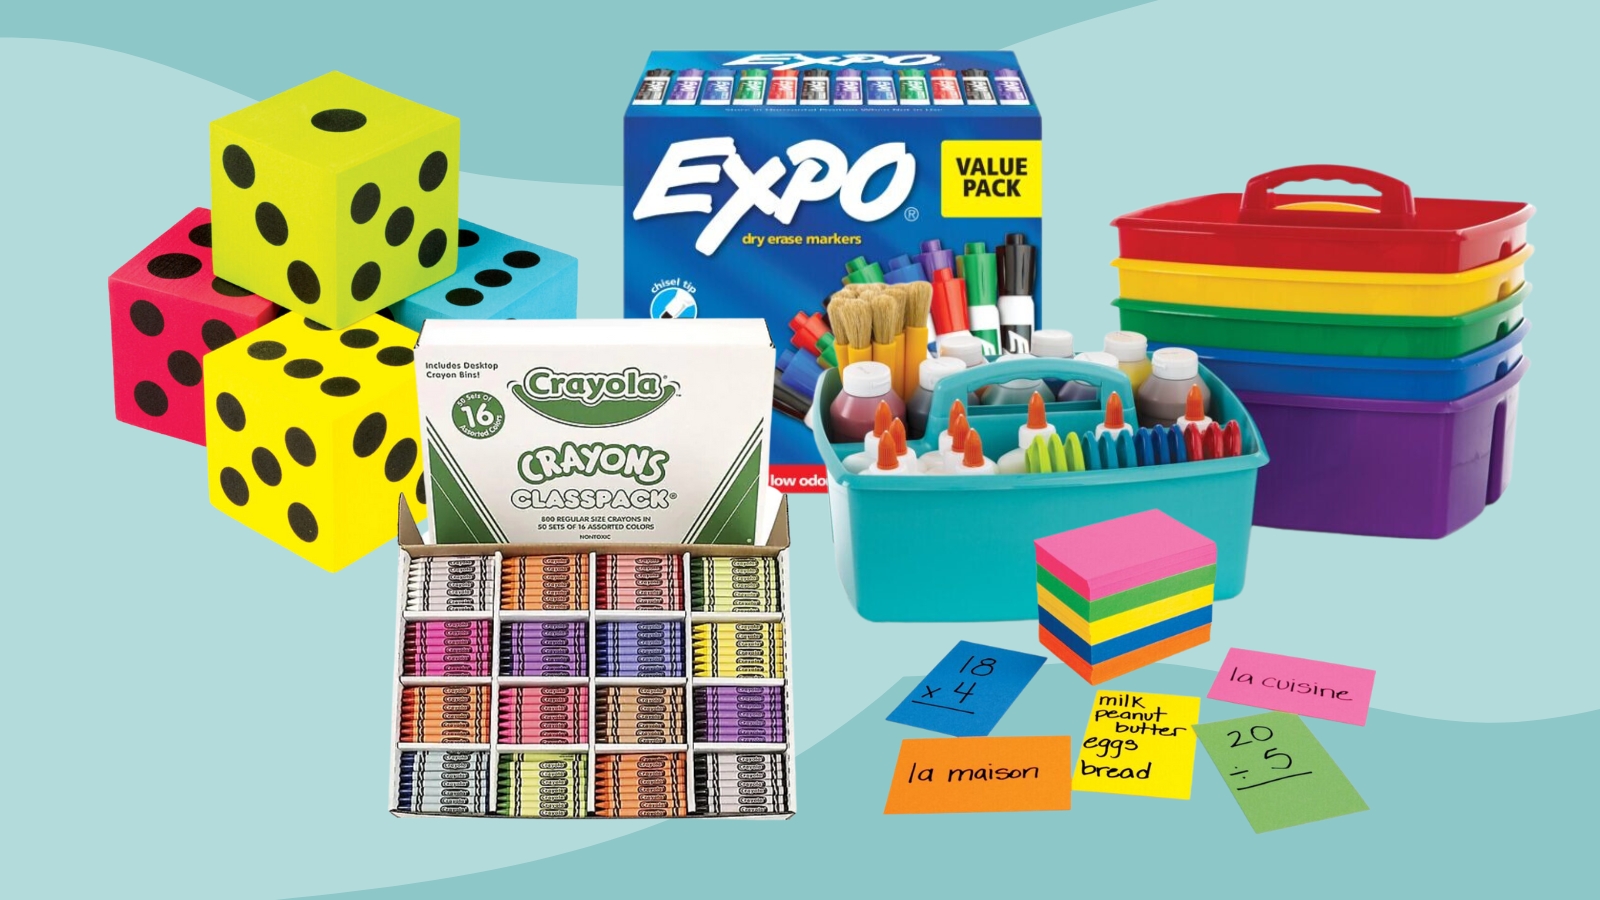 Our Top 20 Back-to-School Classroom Picks From Staples.com